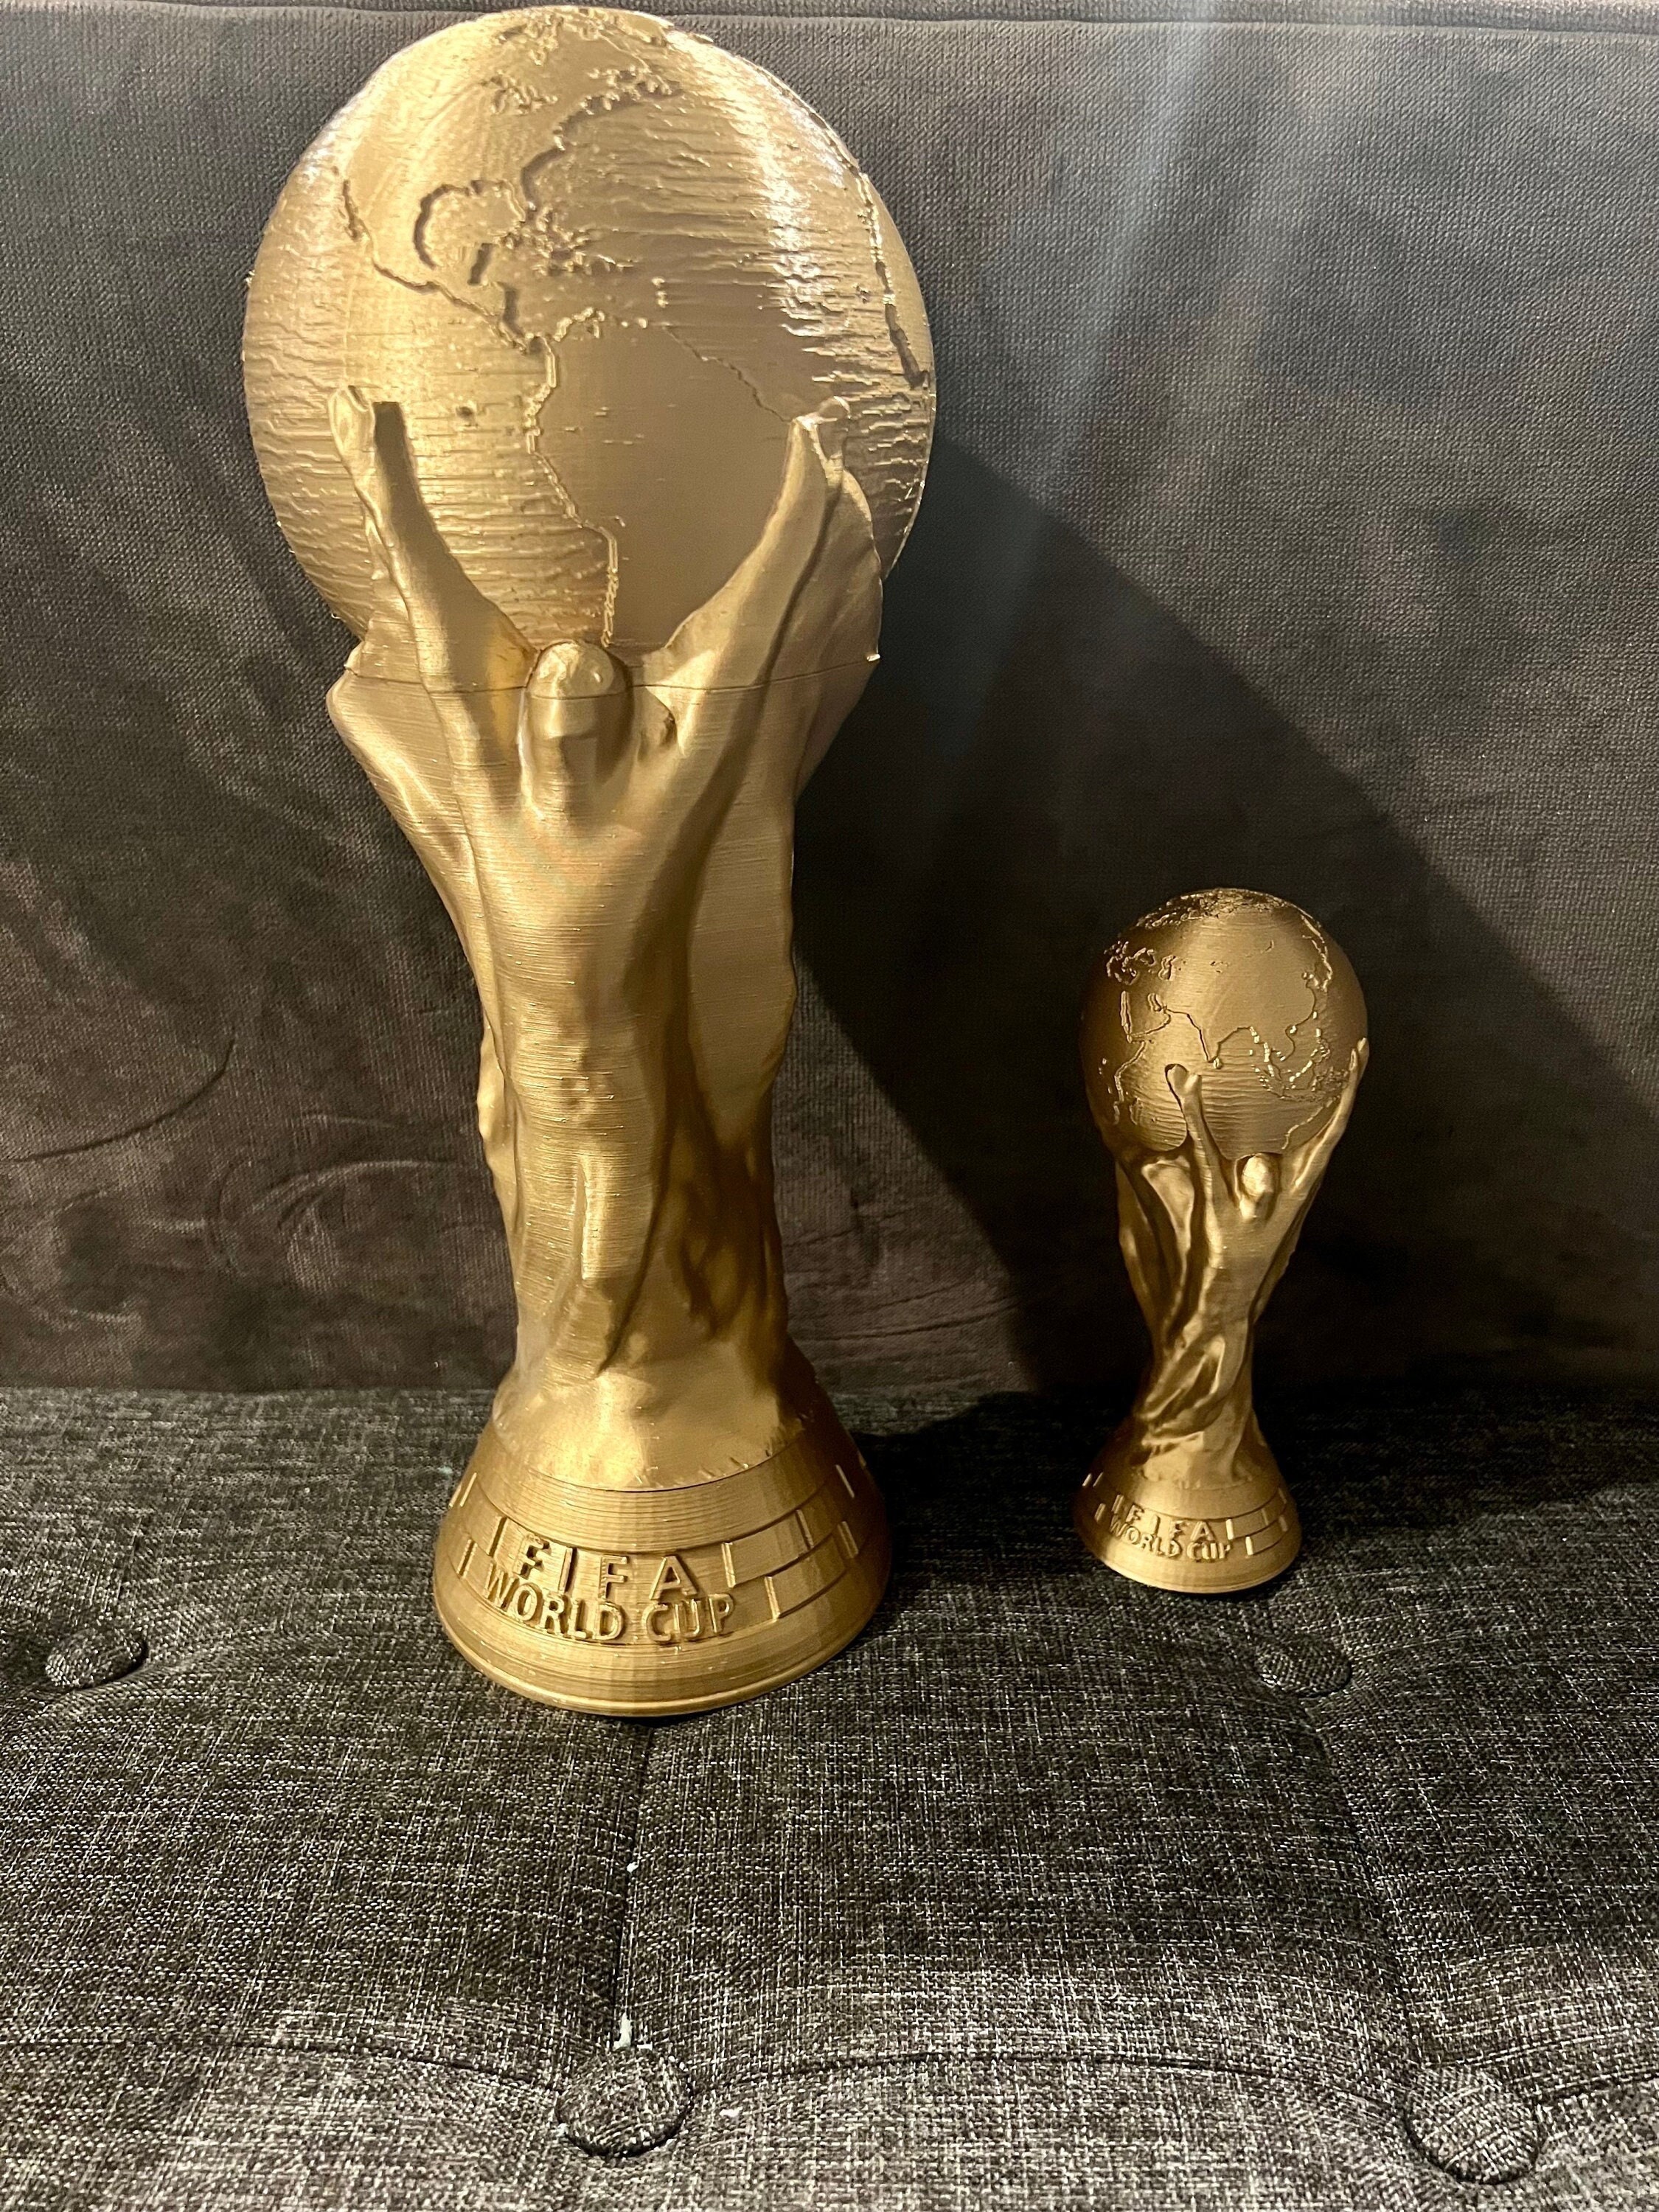  LNGODEHO 2022 World Cup Replica Trophy in Display Case, Resin  Sculpture, Own a World Soccer's Biggest Prize (10.6 inch) : Sports &  Outdoors